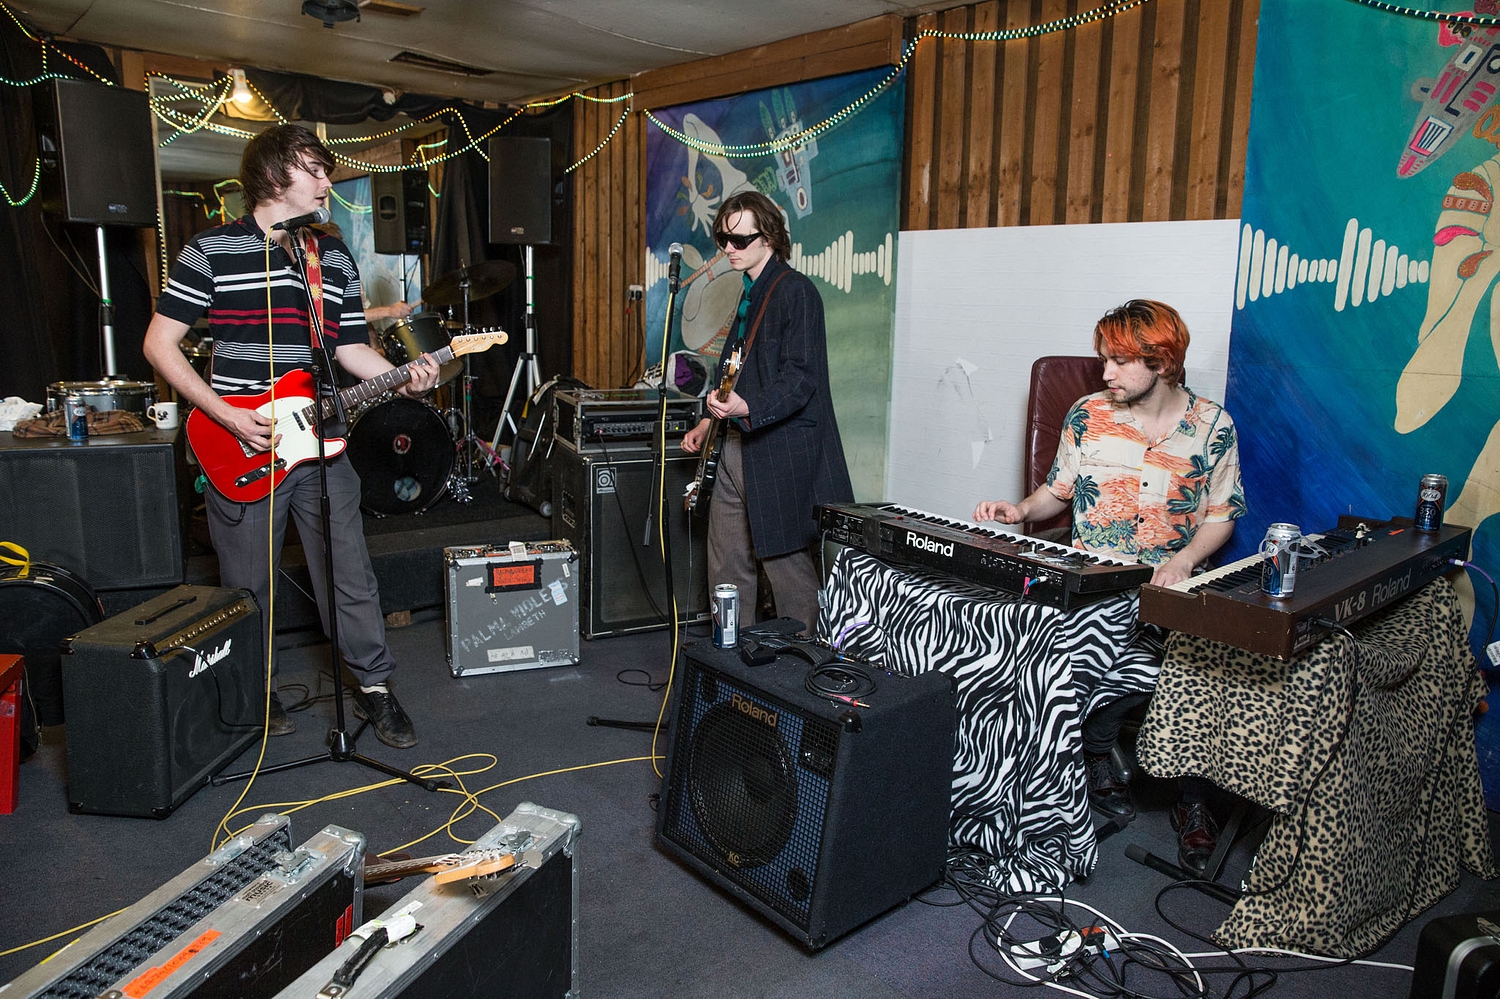 Palma Violets: "We had to take the time to rebuild our creative mojo"